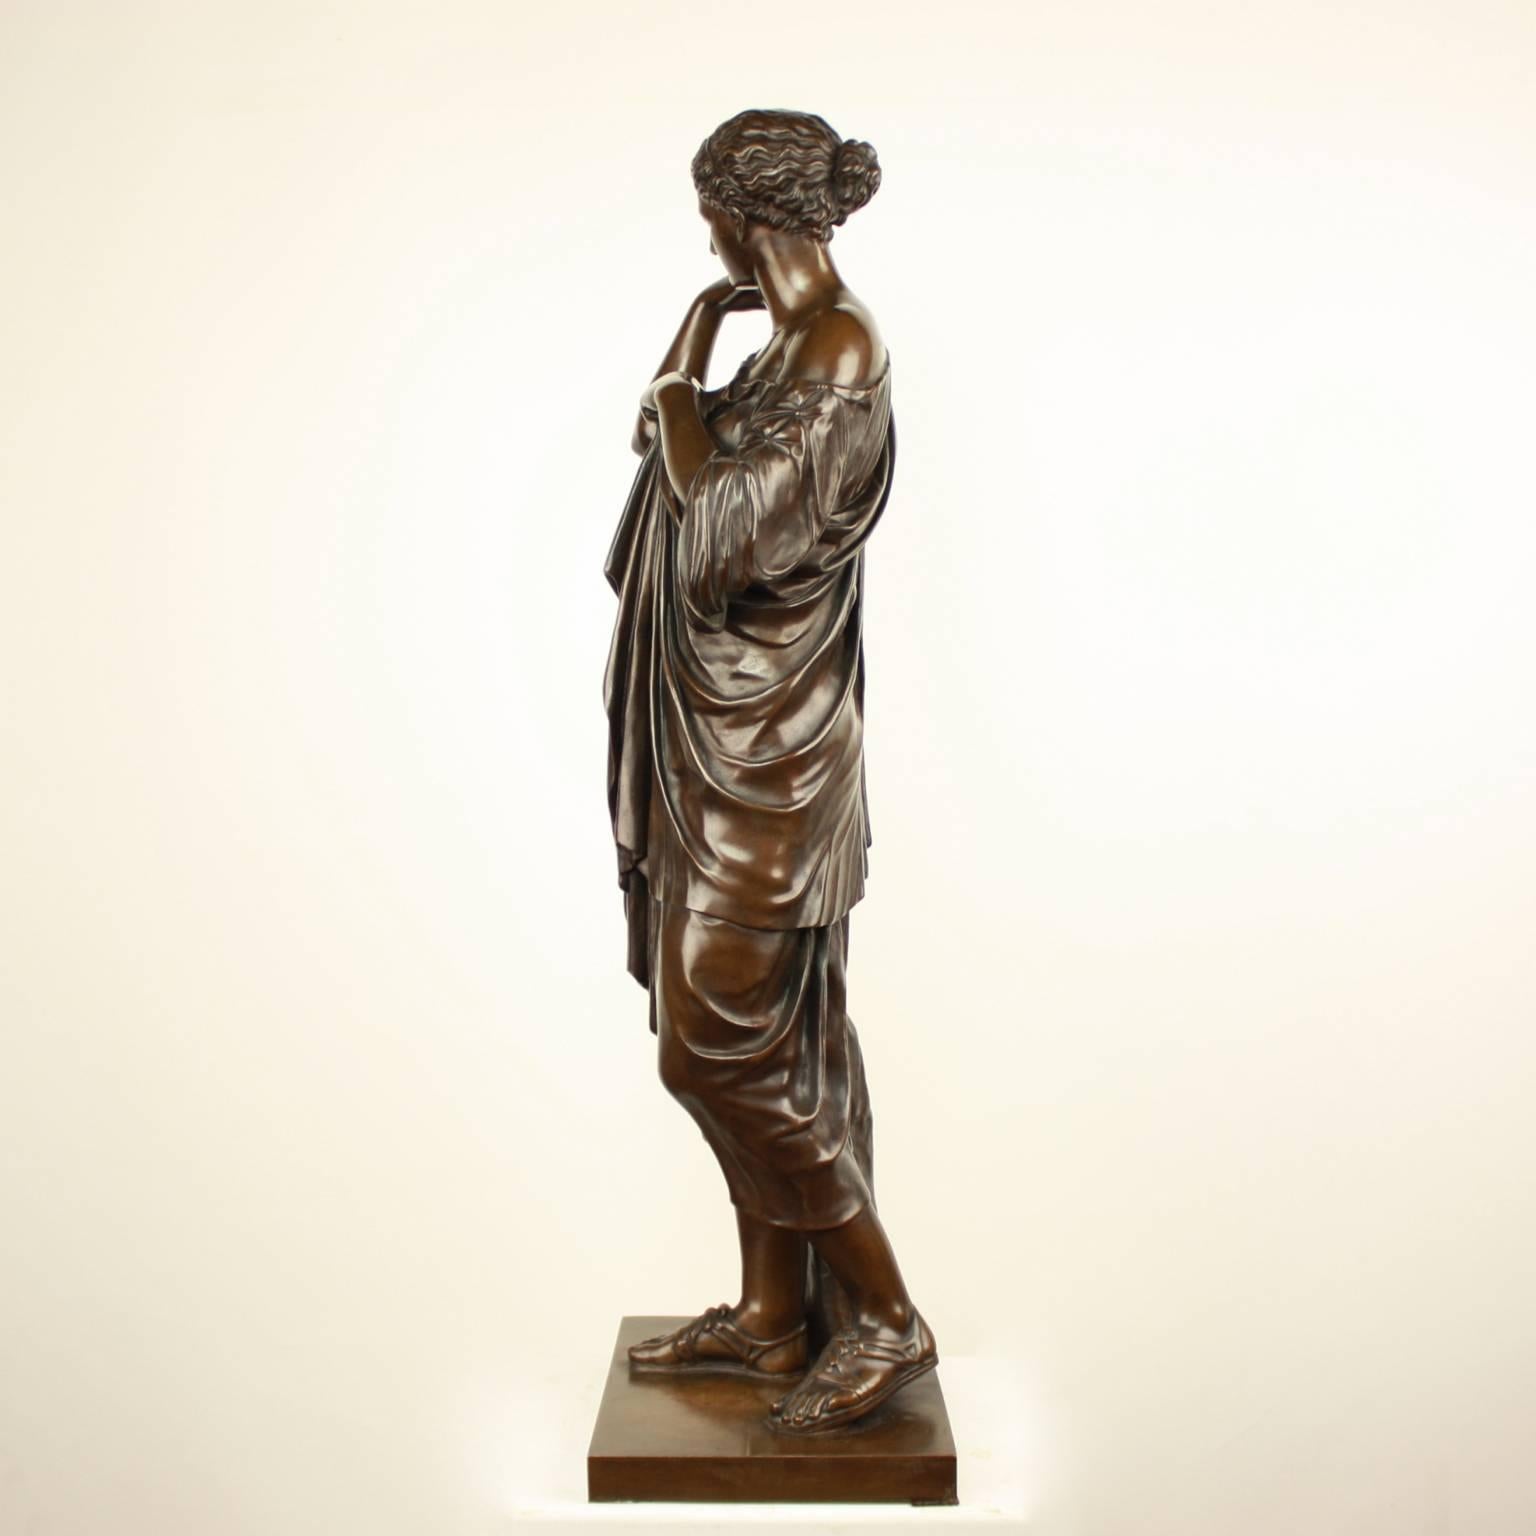 A large bronze sculpture of the 'Diana of Gabii' signed 'F. Barbedienne'. The Barbedienne foundry, well-known for its superb quality casts using 'Collas' mechanical reduction method, reproduced bronze sculptures after large original classical